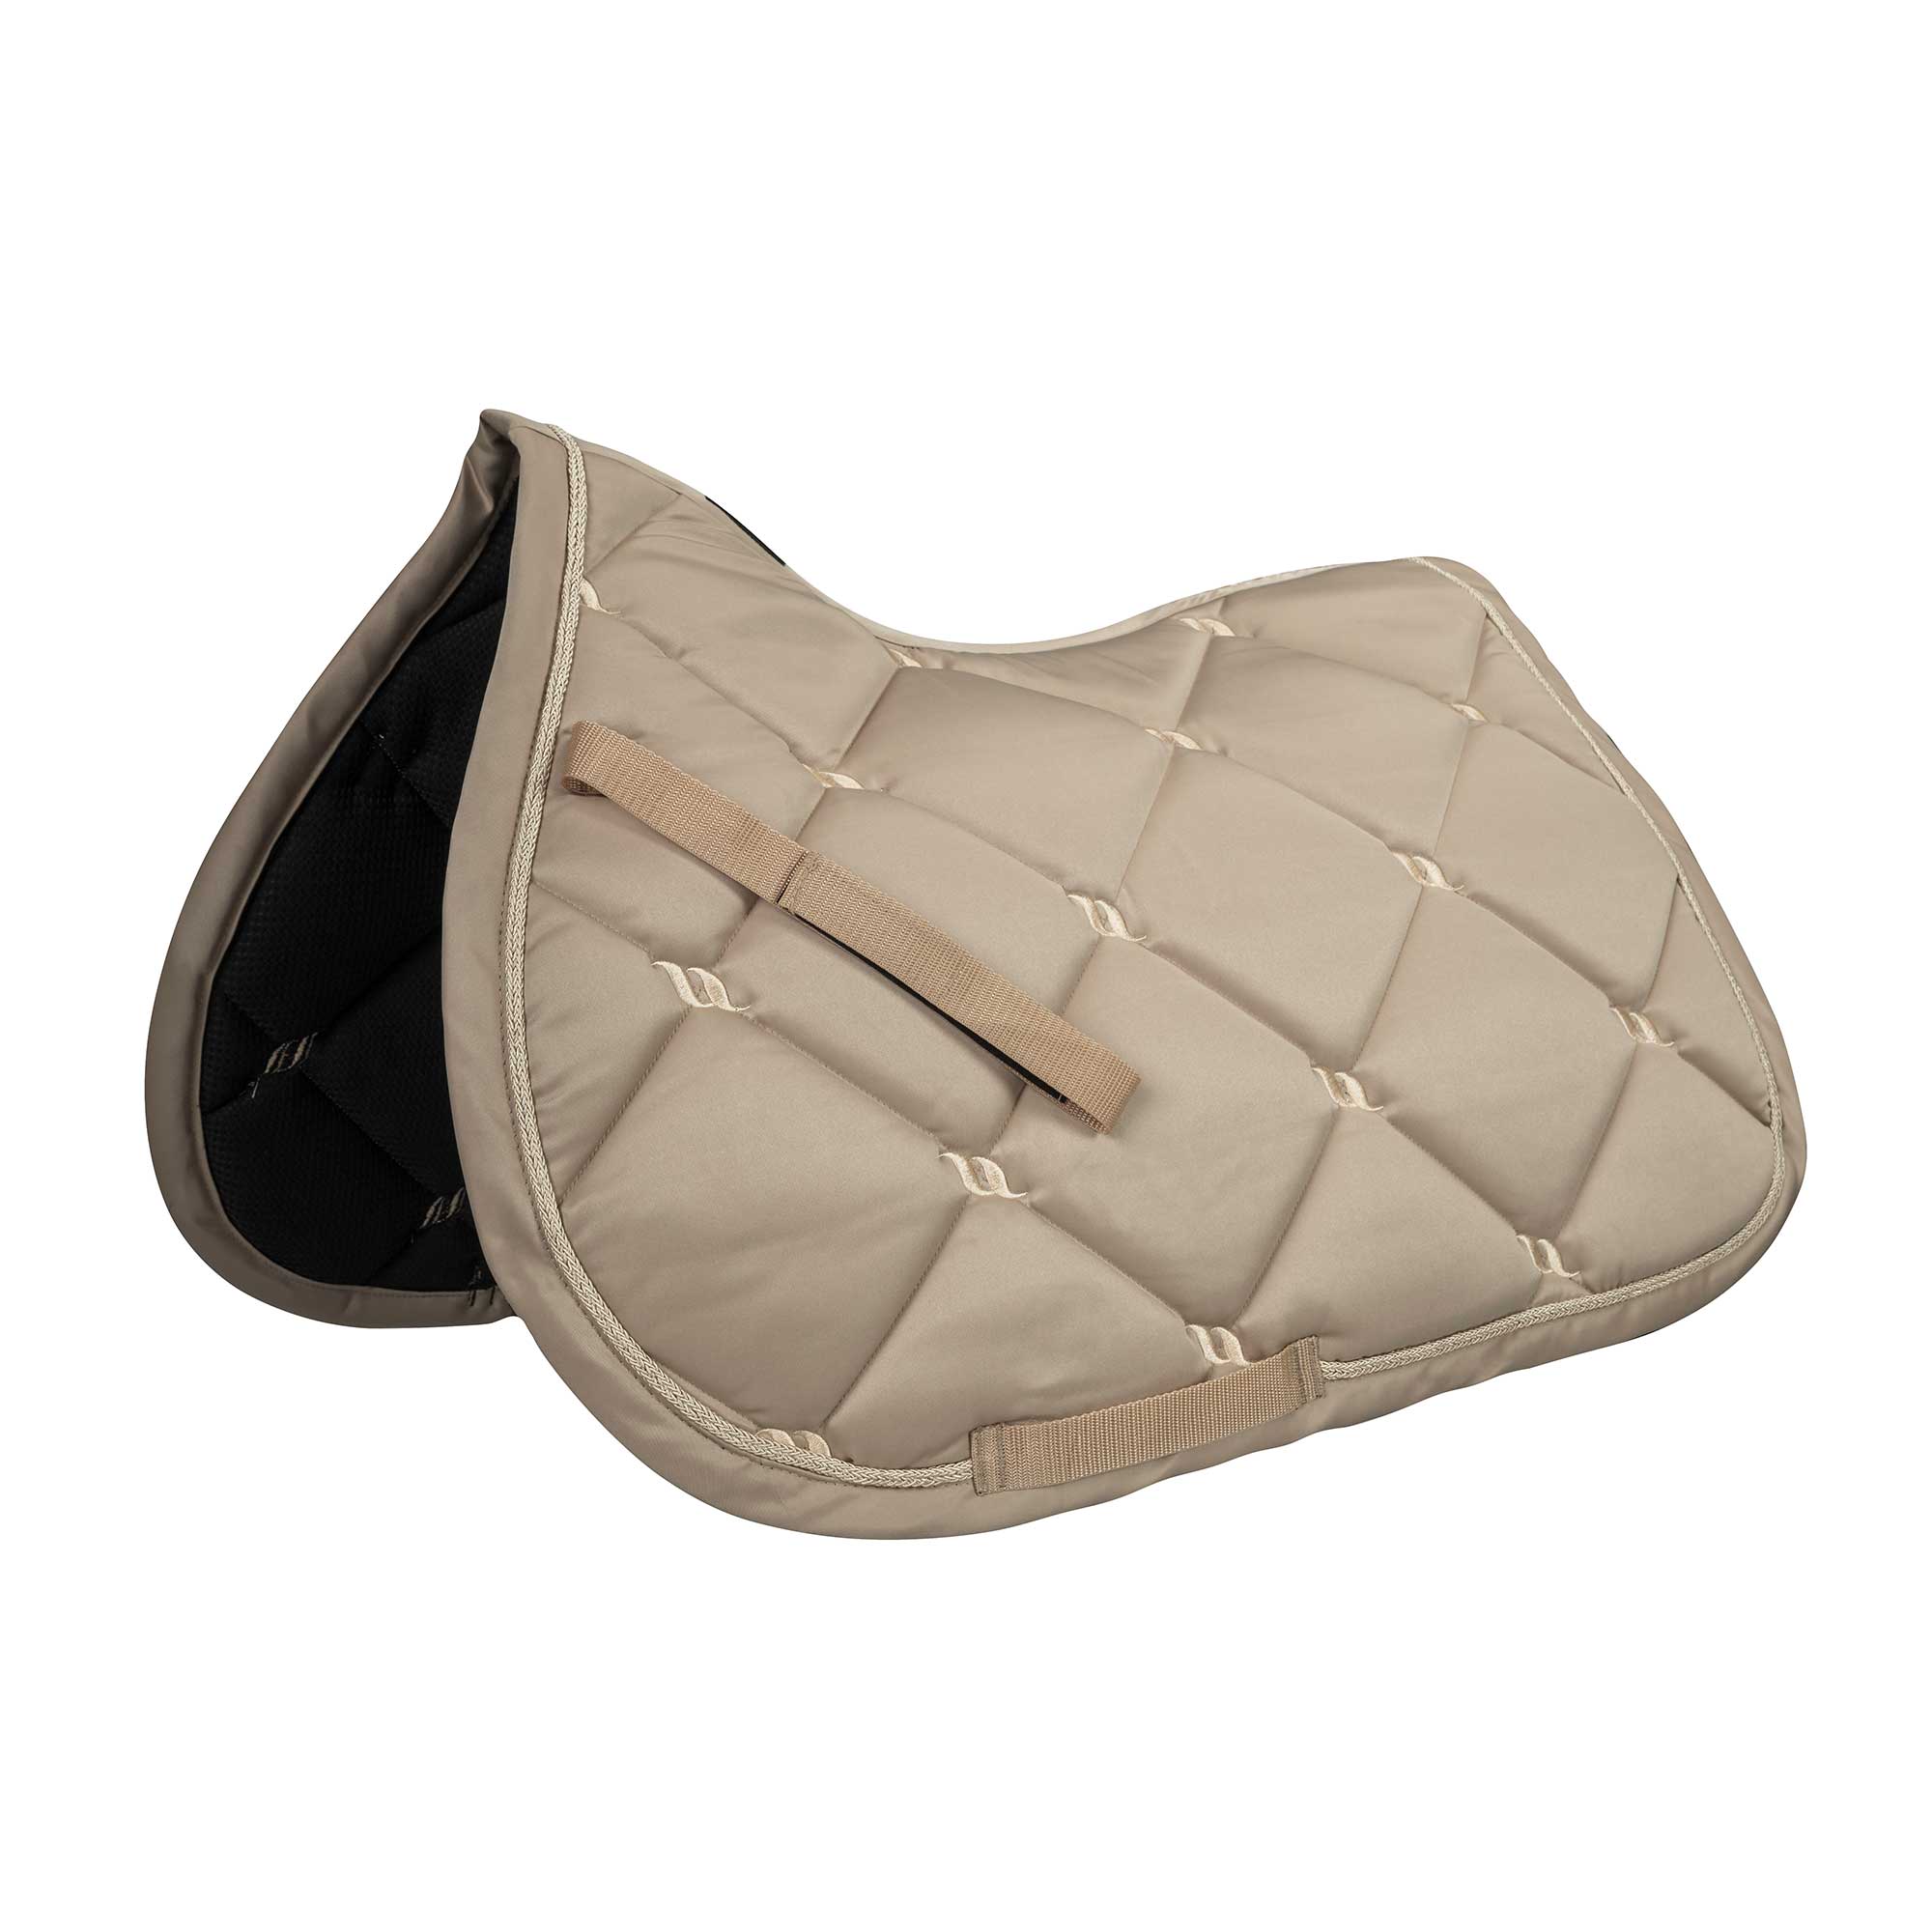 "Nights Collection" Saddle Pad Jumping Champagne